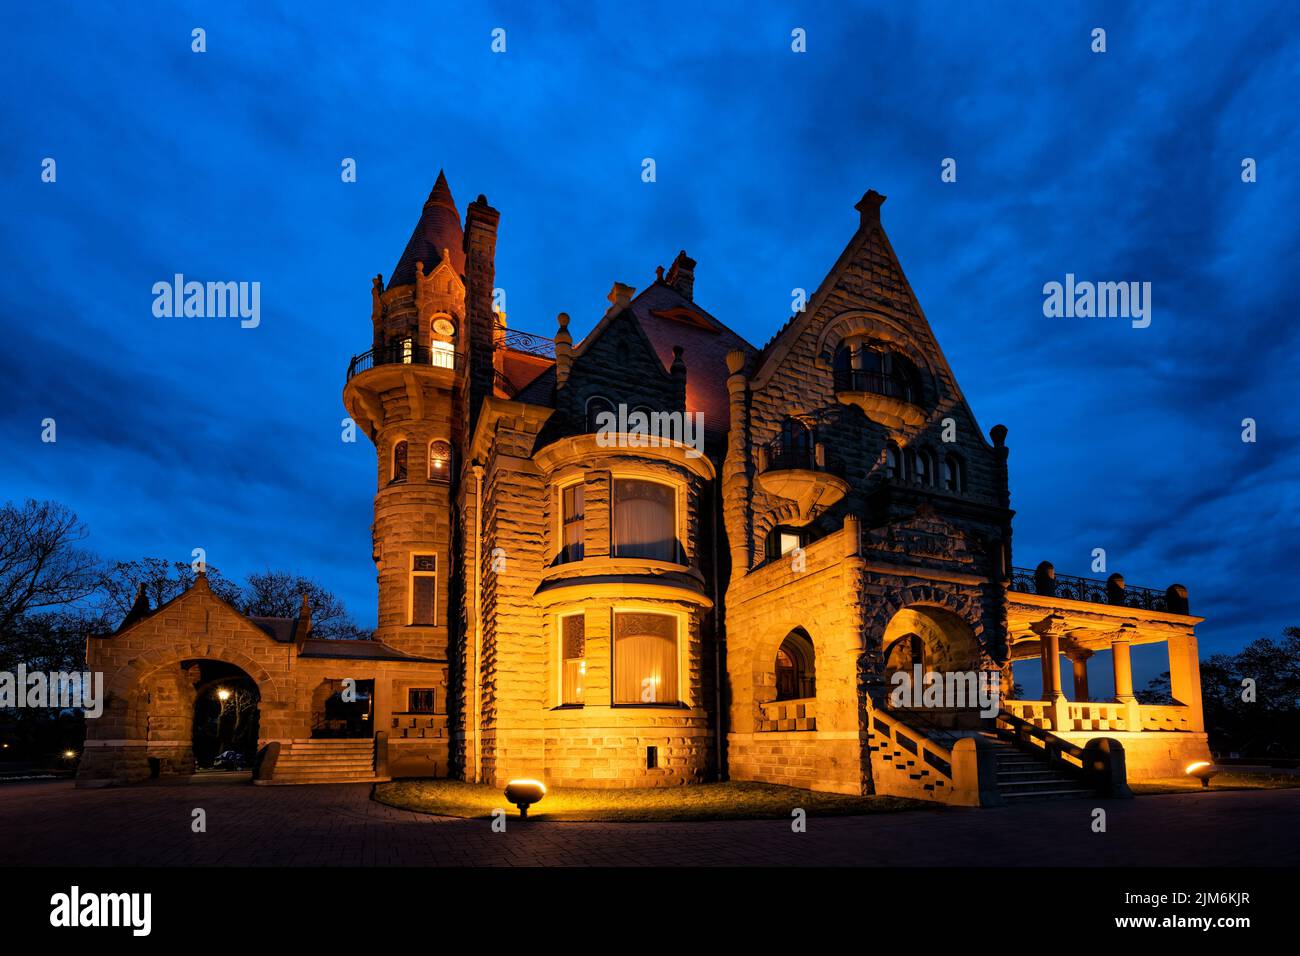 A night view of the Craigdarroch Castle, Victoria, Vancouver Island, BC Canada Stock Photo